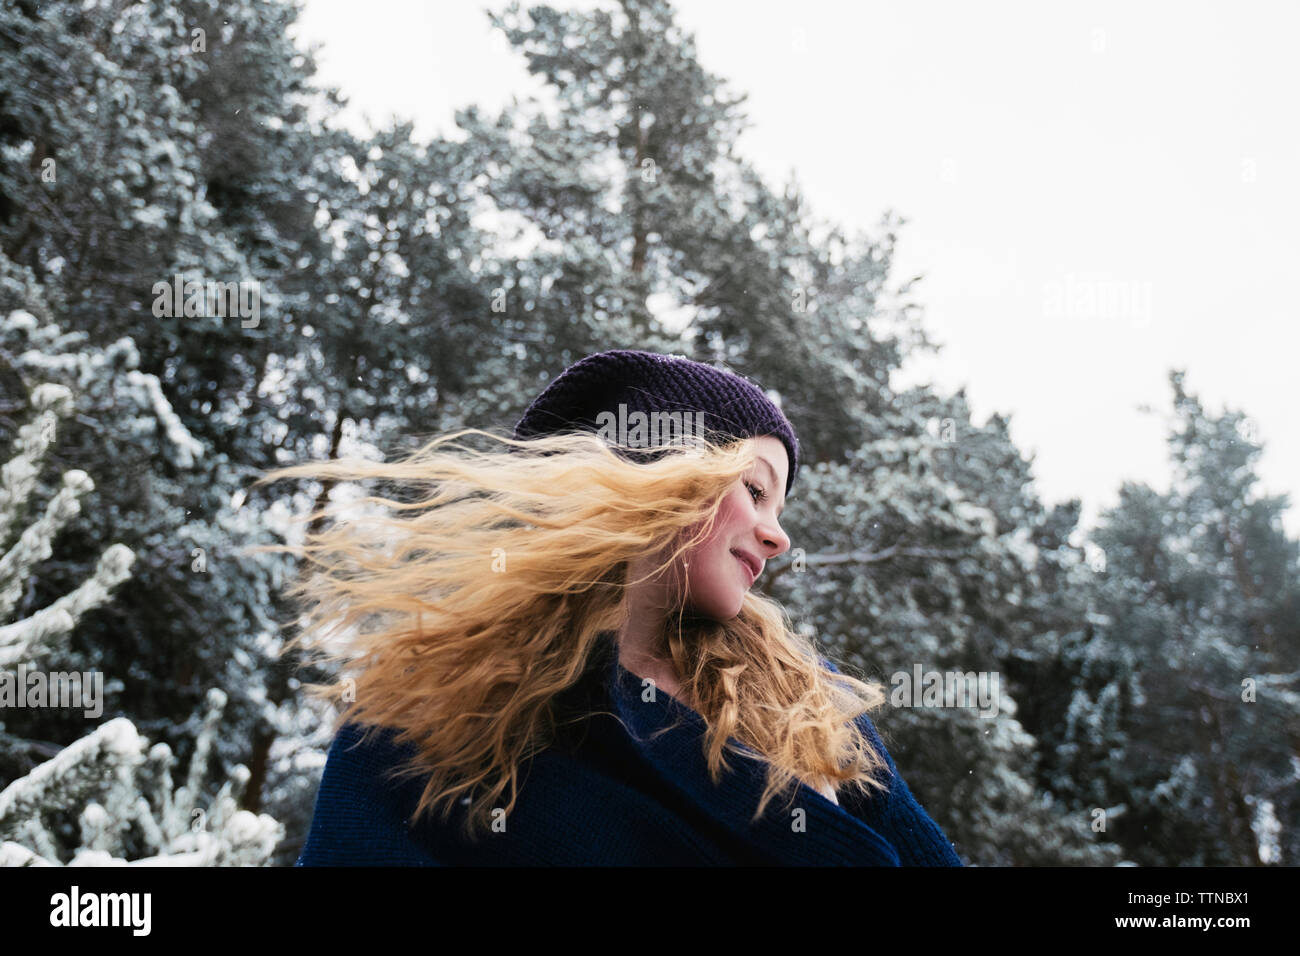 Low angle view of woman with Blonde hair looking away while standing contre des arbres en forêt durant l'hiver Banque D'Images